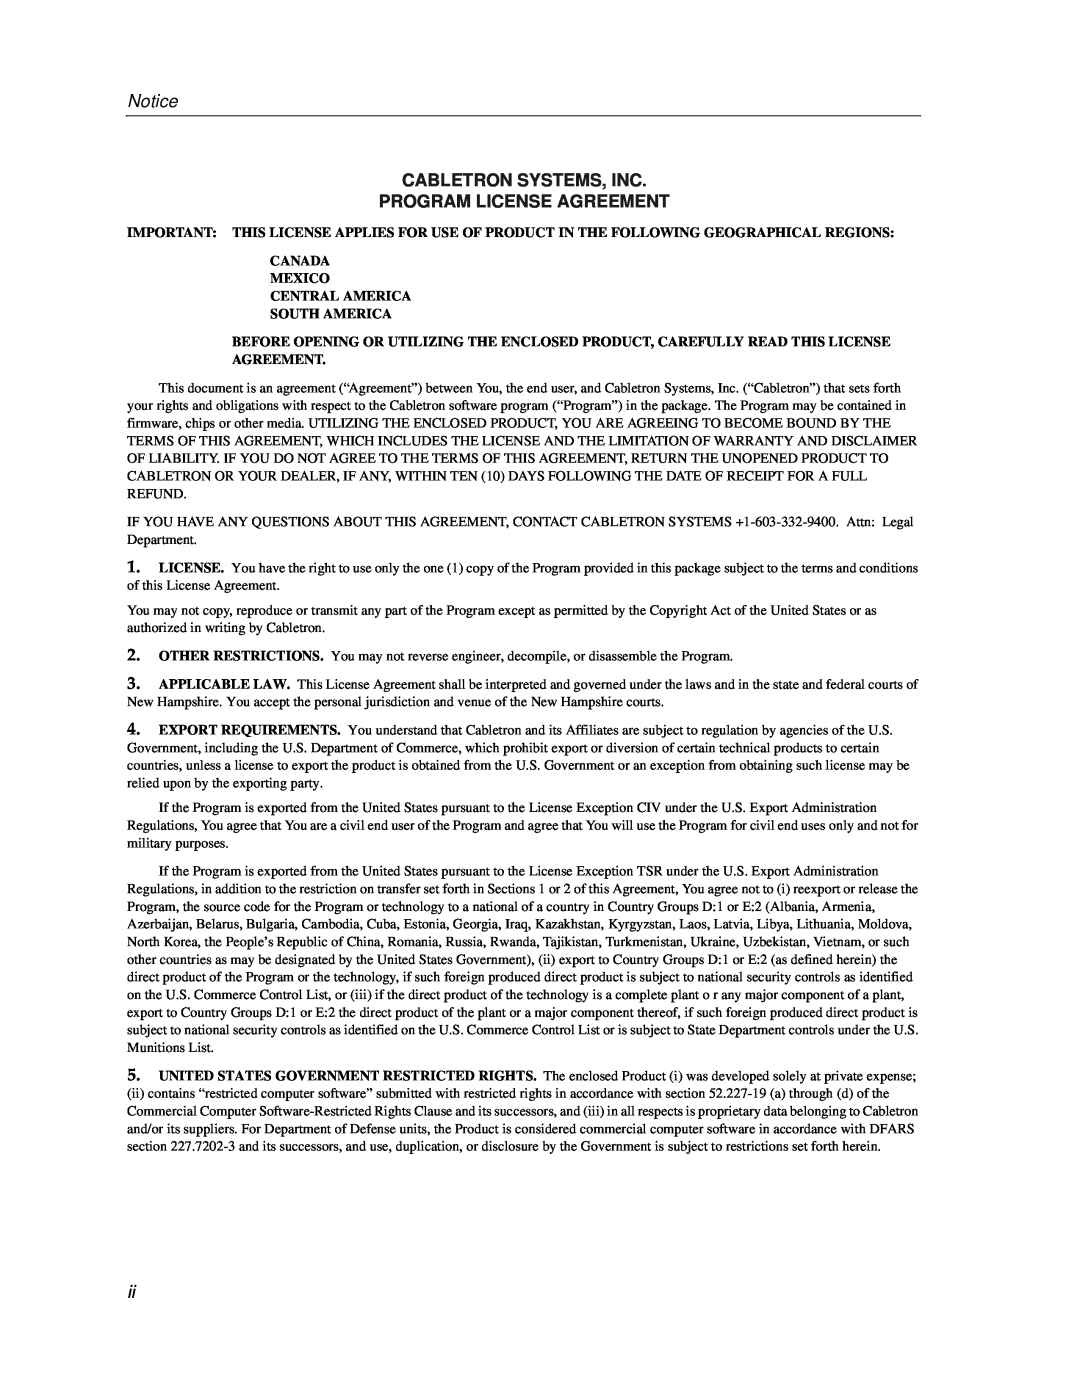 Cabletron Systems 9F122-12, 9F120-08, 9F125-0 manual Cabletron Systems, Inc Program License Agreement 